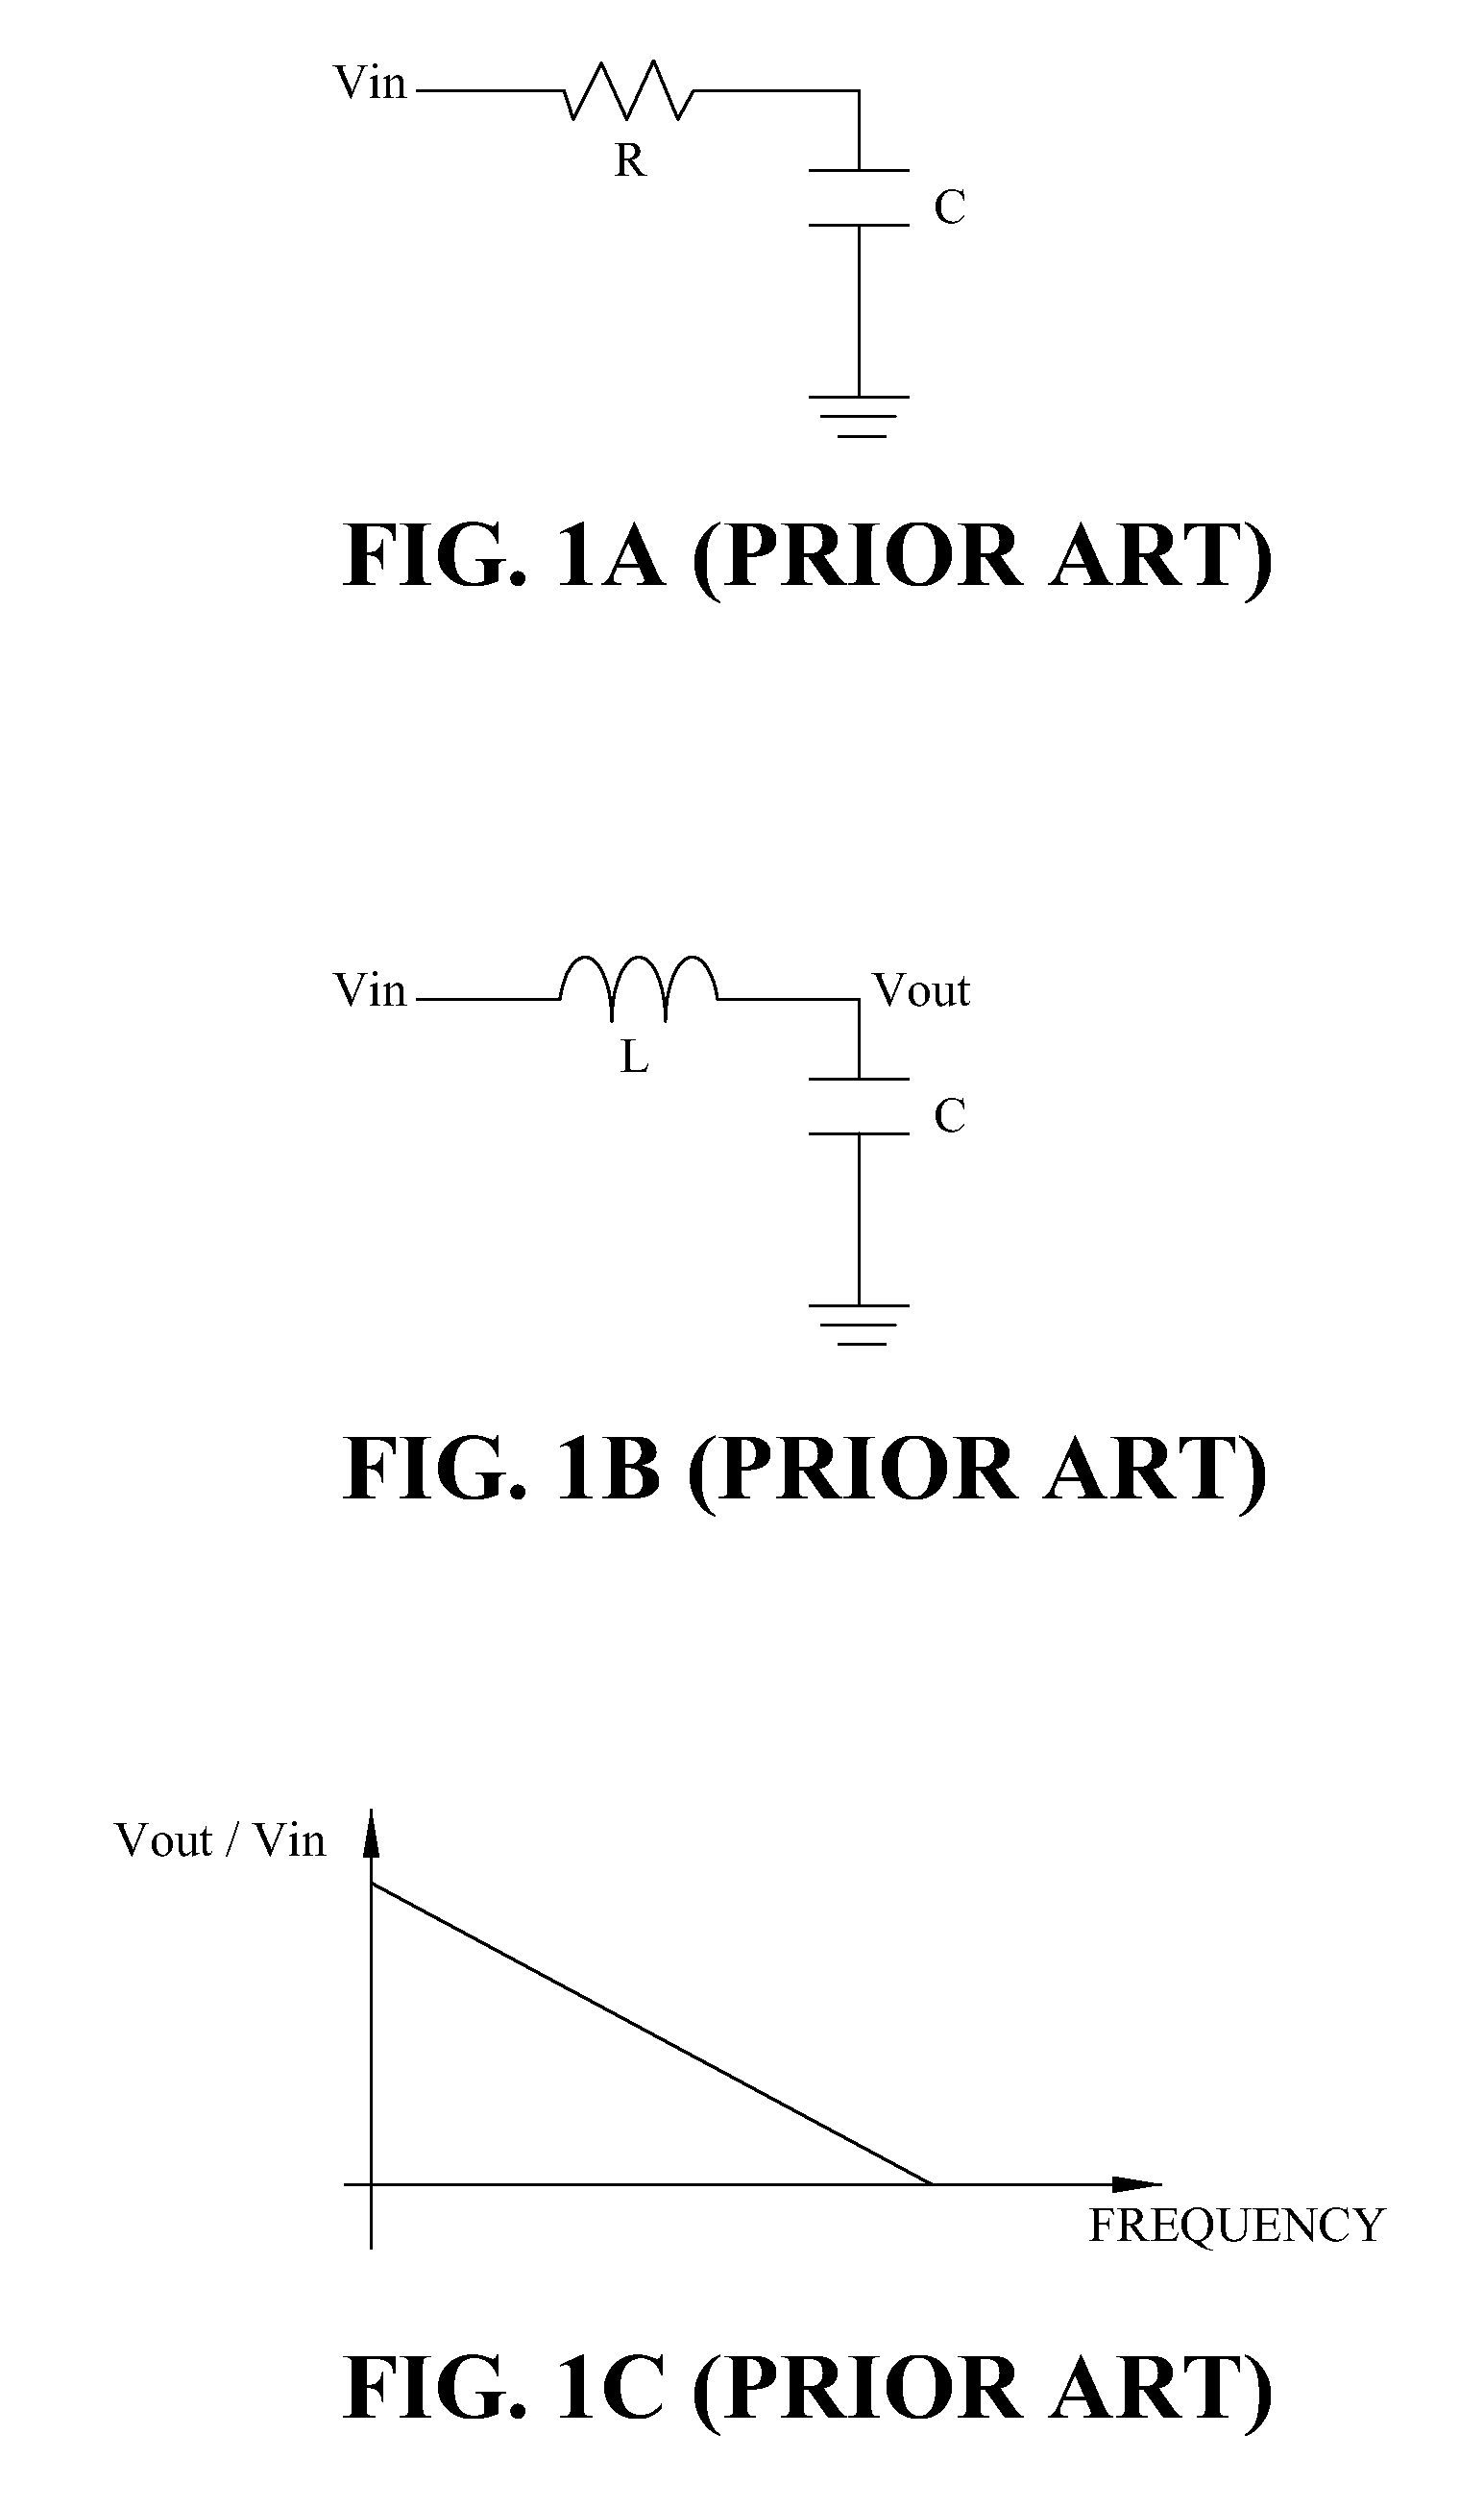 Calibration apparatus and method for programmable response frequency selecting elements